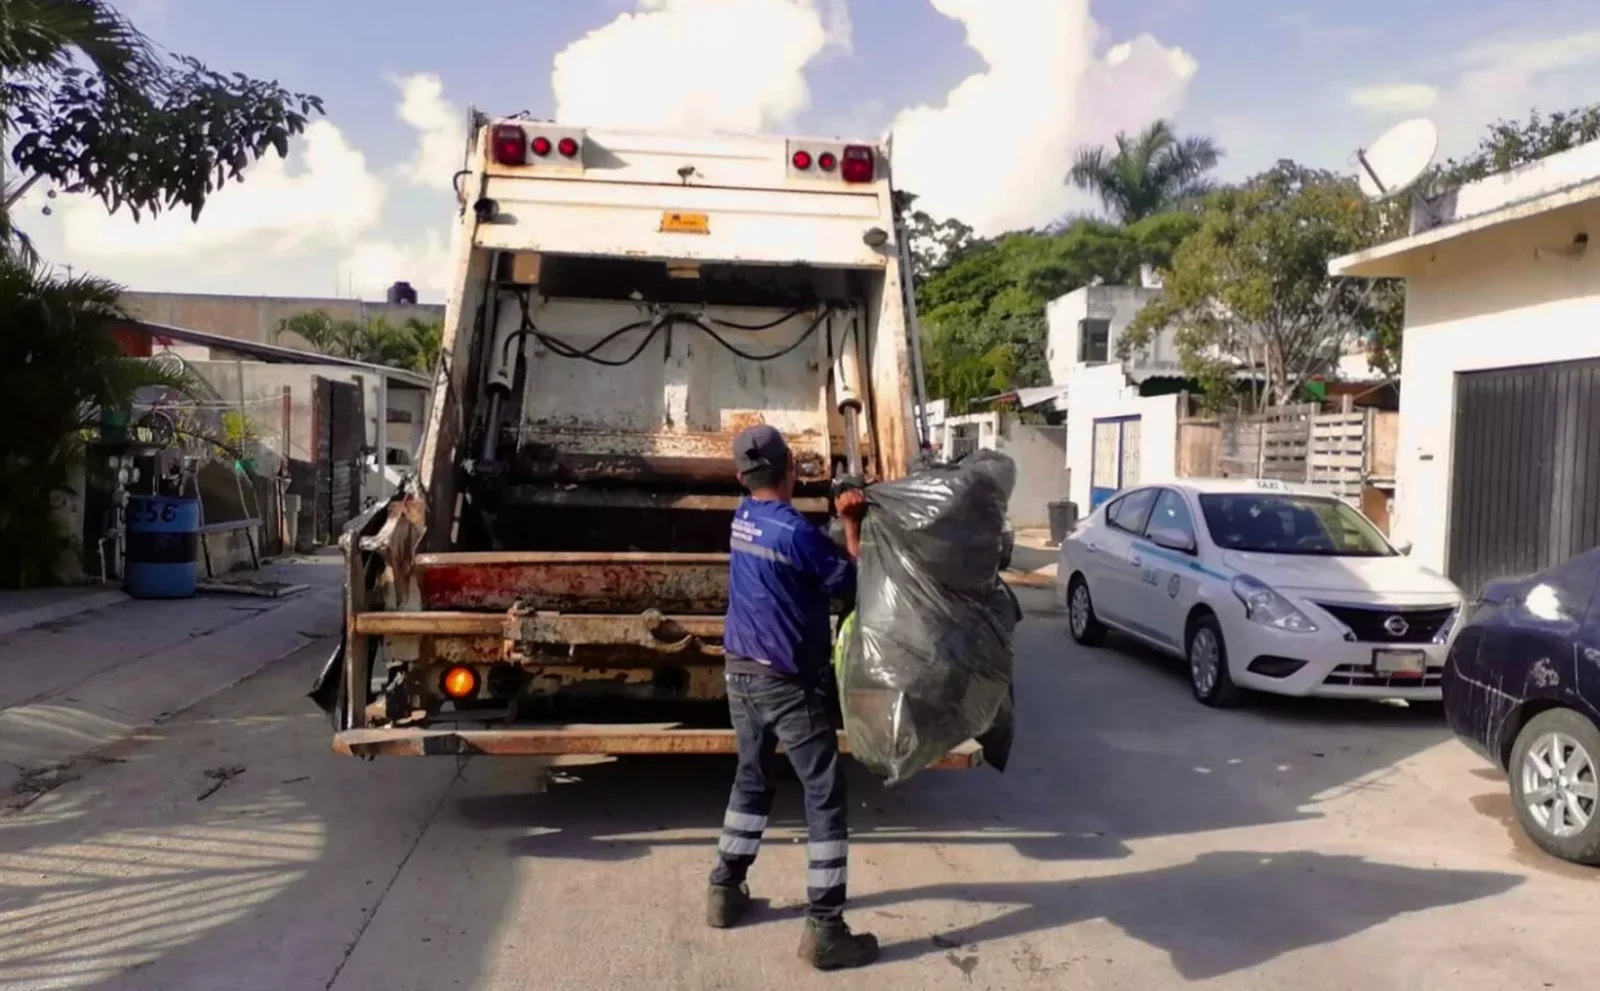 A worker in a blue uniform lifting a large trash bag into a garbage truck on a sunny residential street.